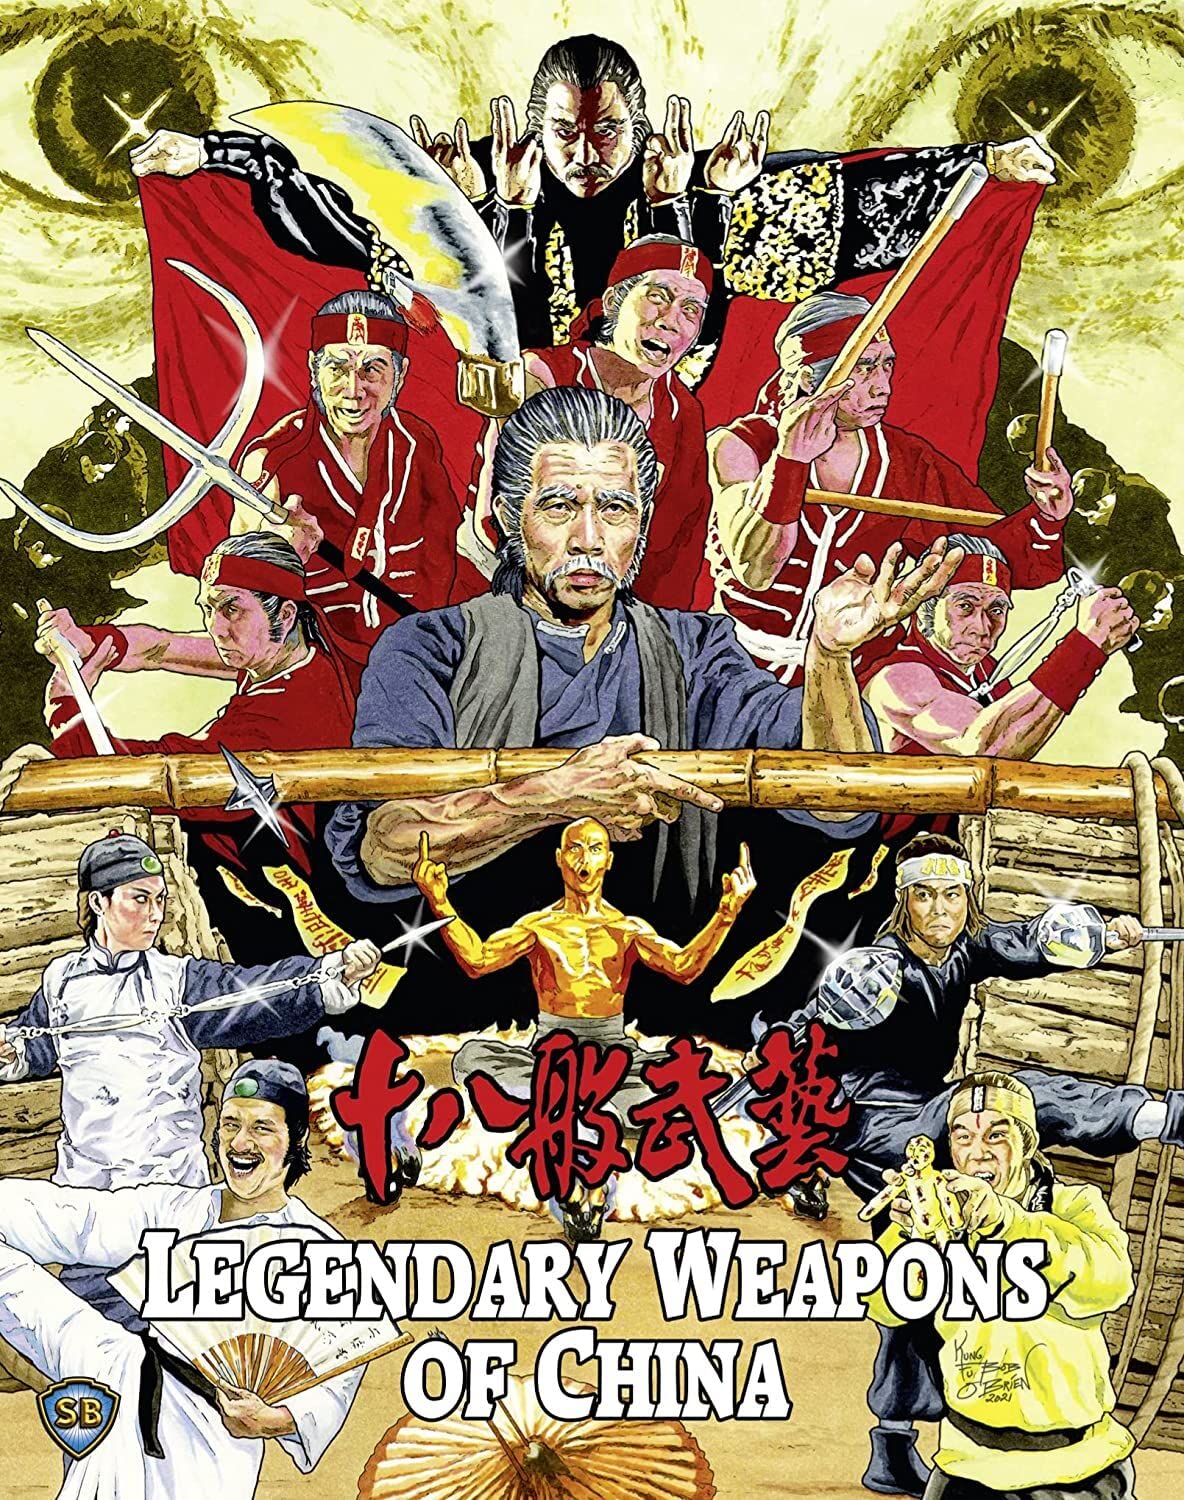 Legendary Weapons Of China (88 Films) - Darkside Records